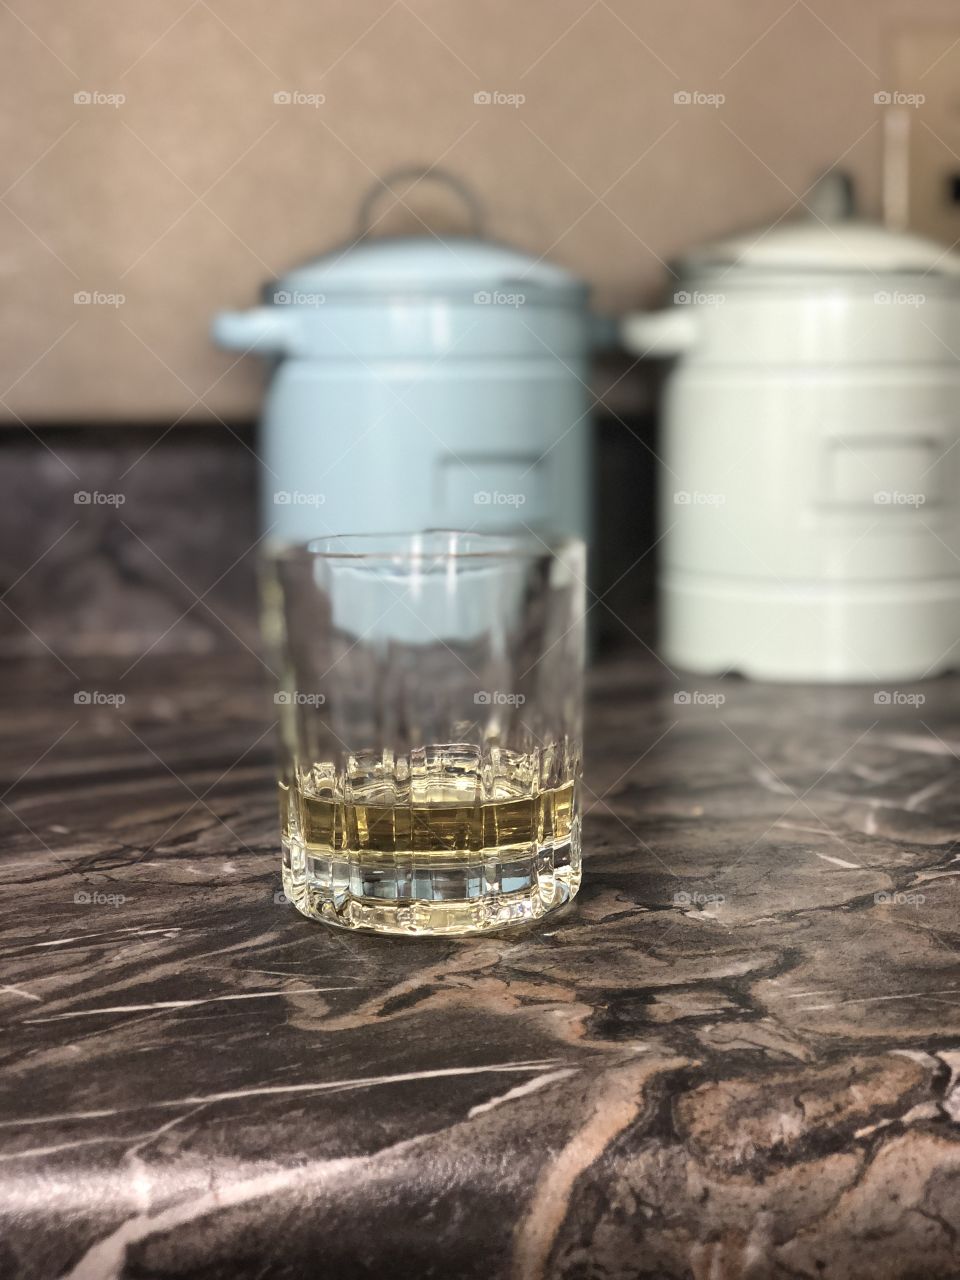 It’s never a bad time for Scotch